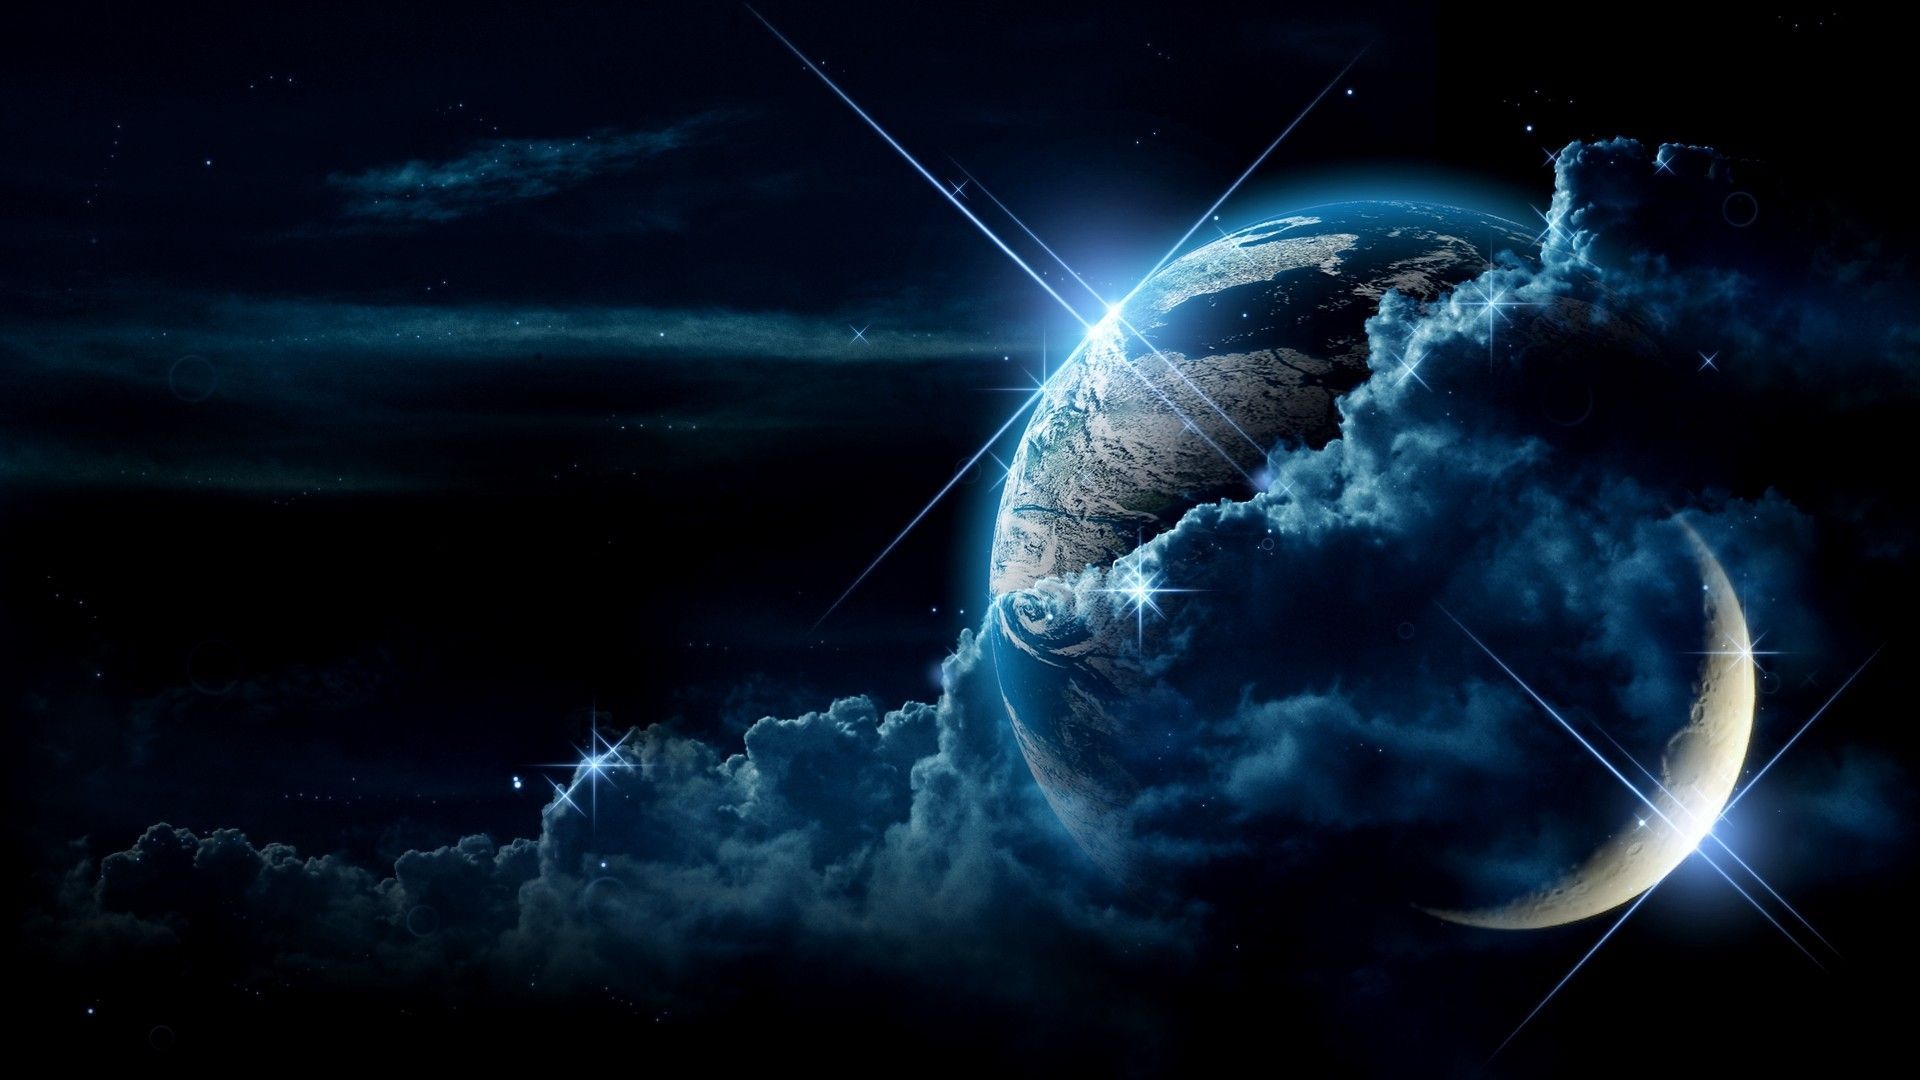 Outer space planets moon earth planet sci fi stars wallpaper